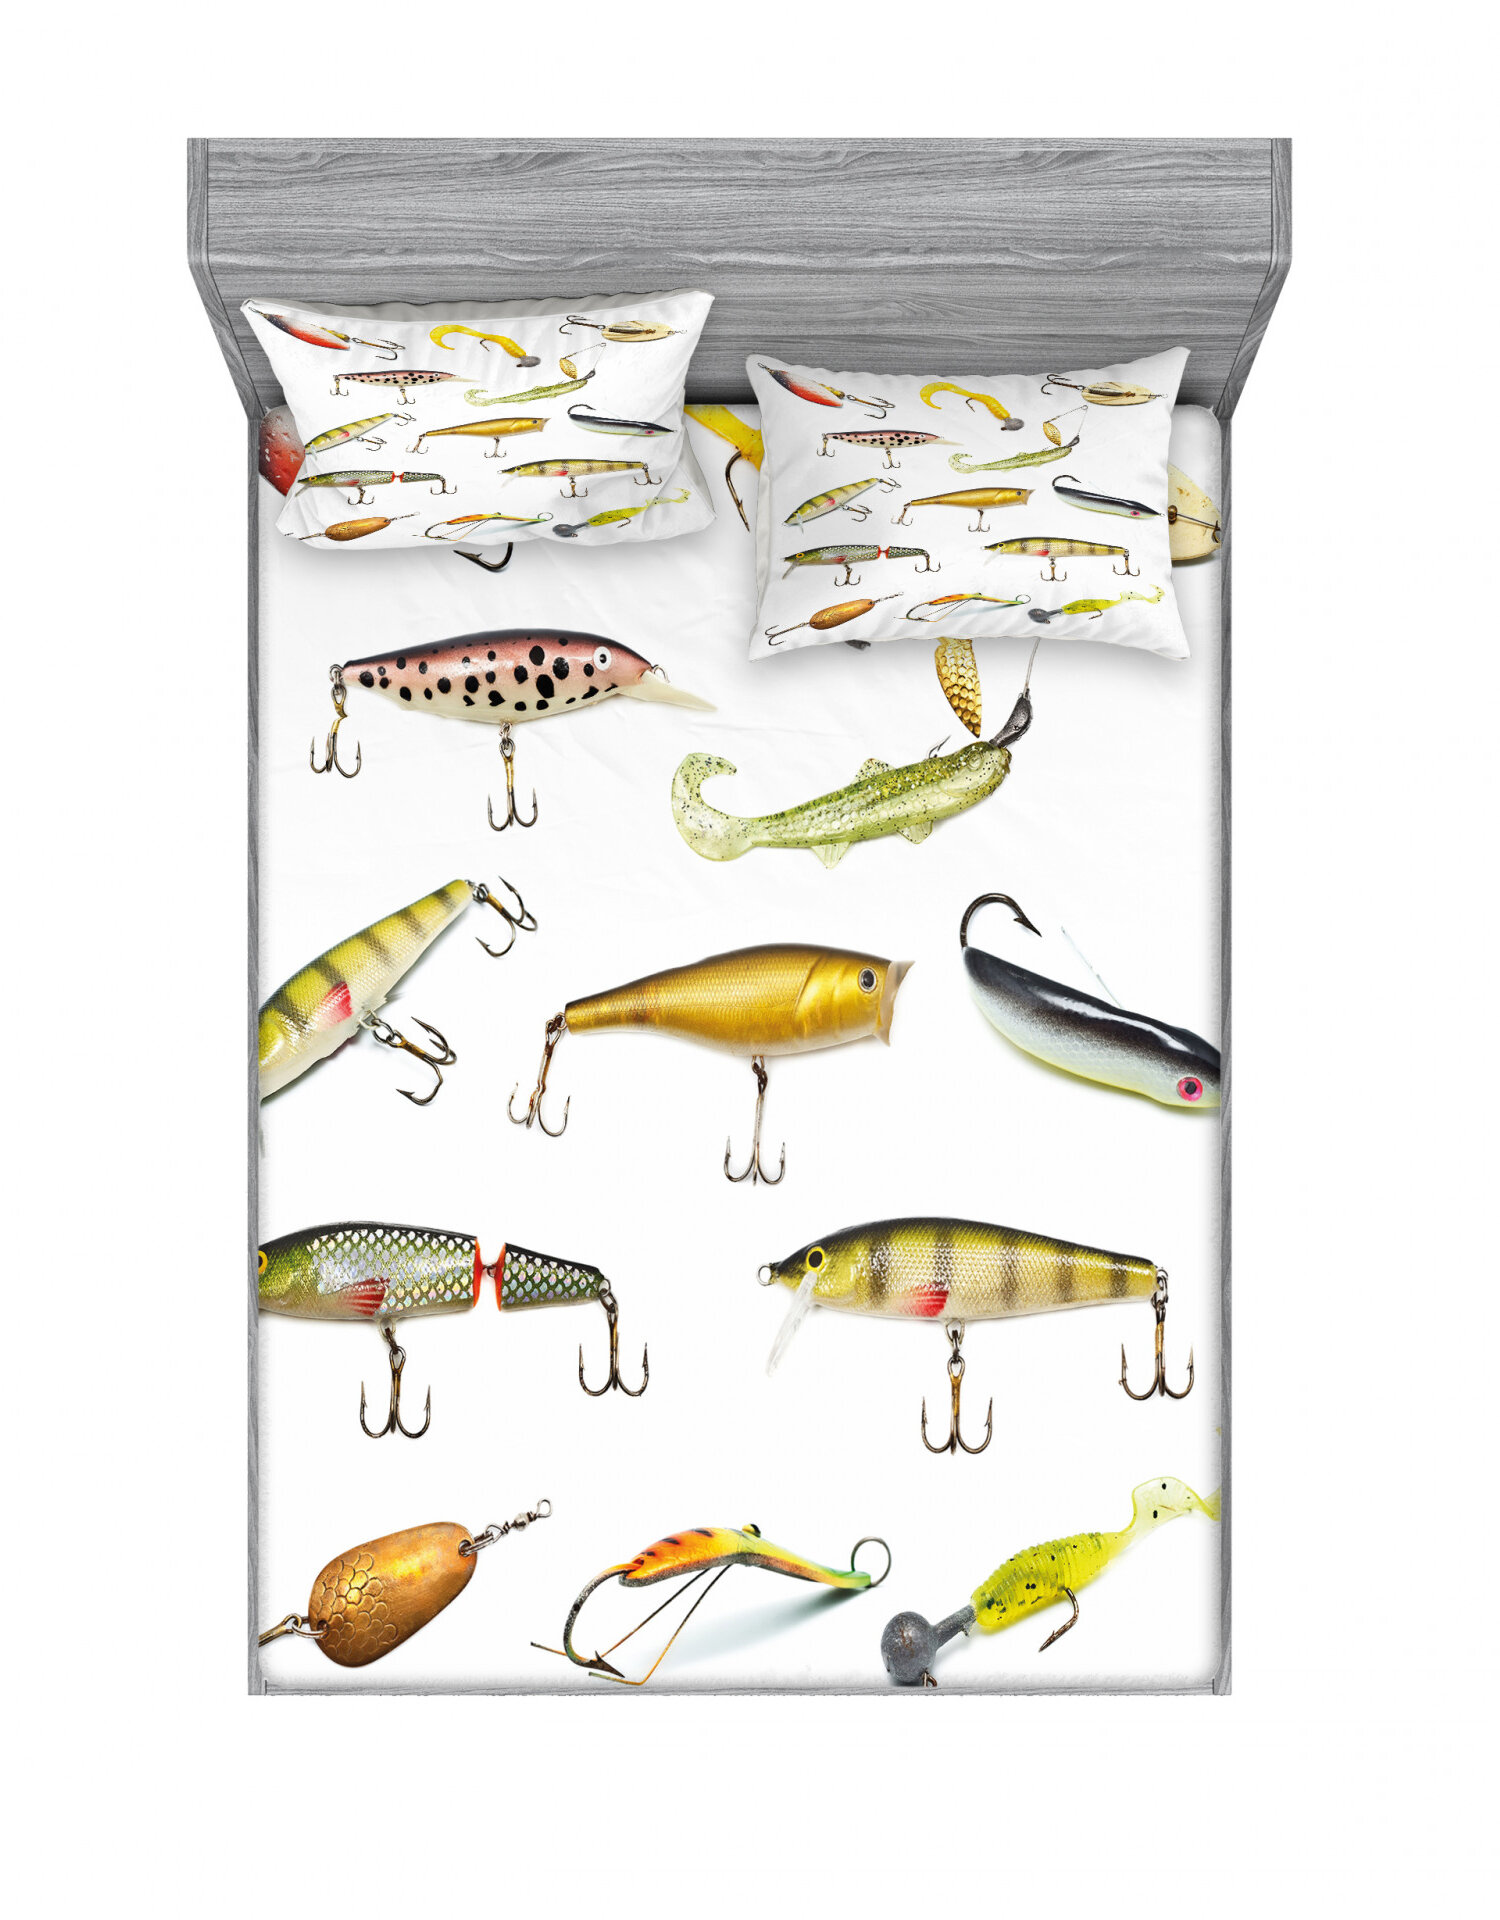 Bless international Fishing Tackle Bait For Spearing Trapping